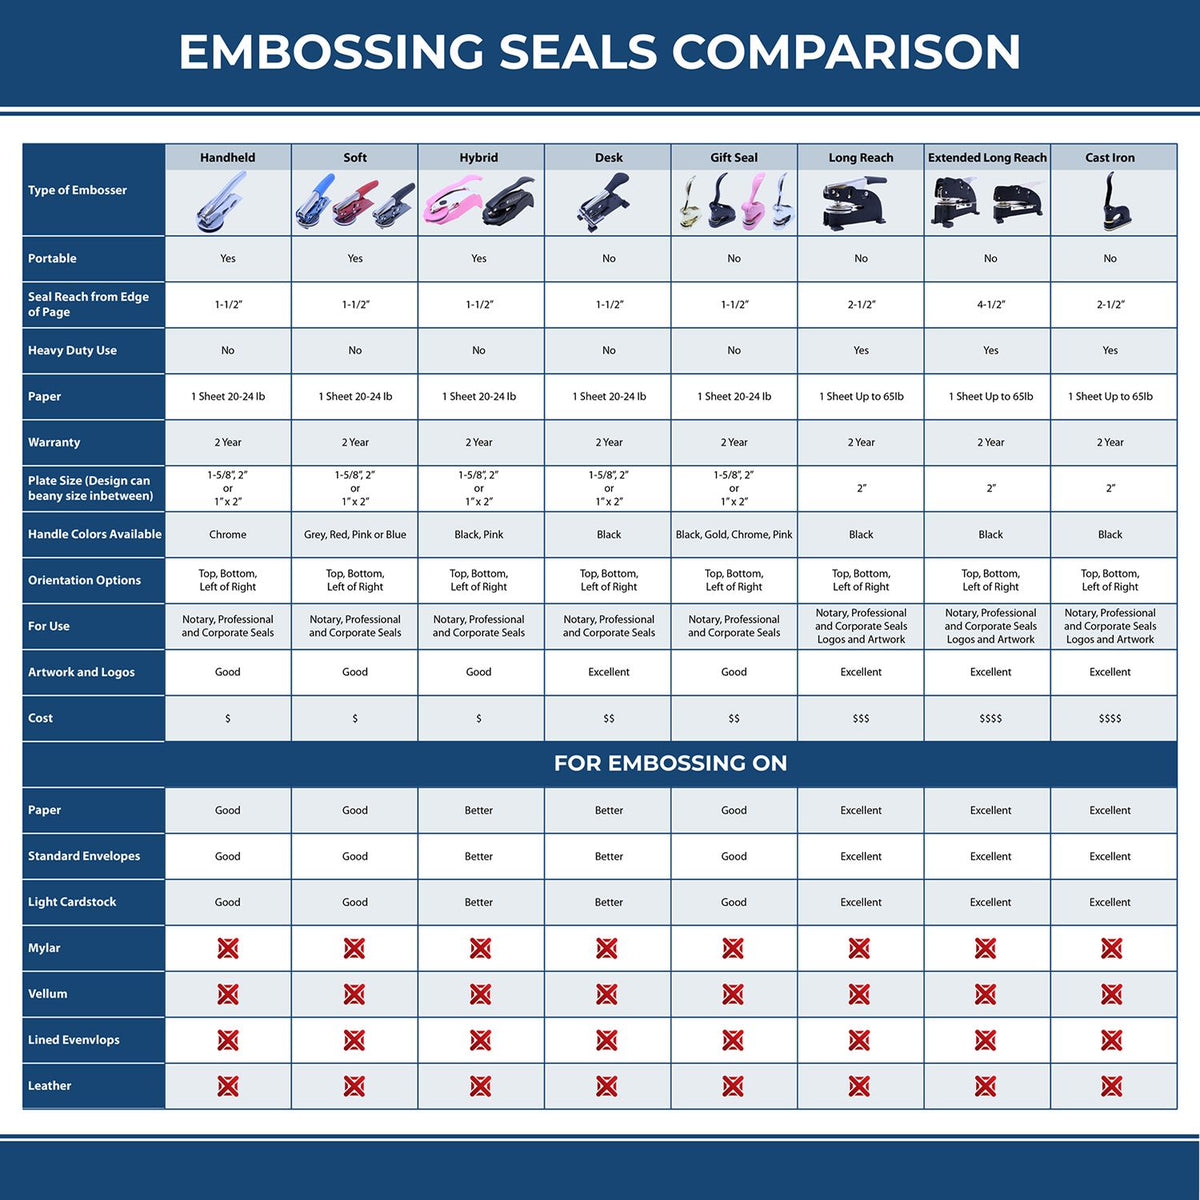 A comparison chart for the different types of mount models available for the Heavy Duty Cast Iron North Dakota Architect Embosser.